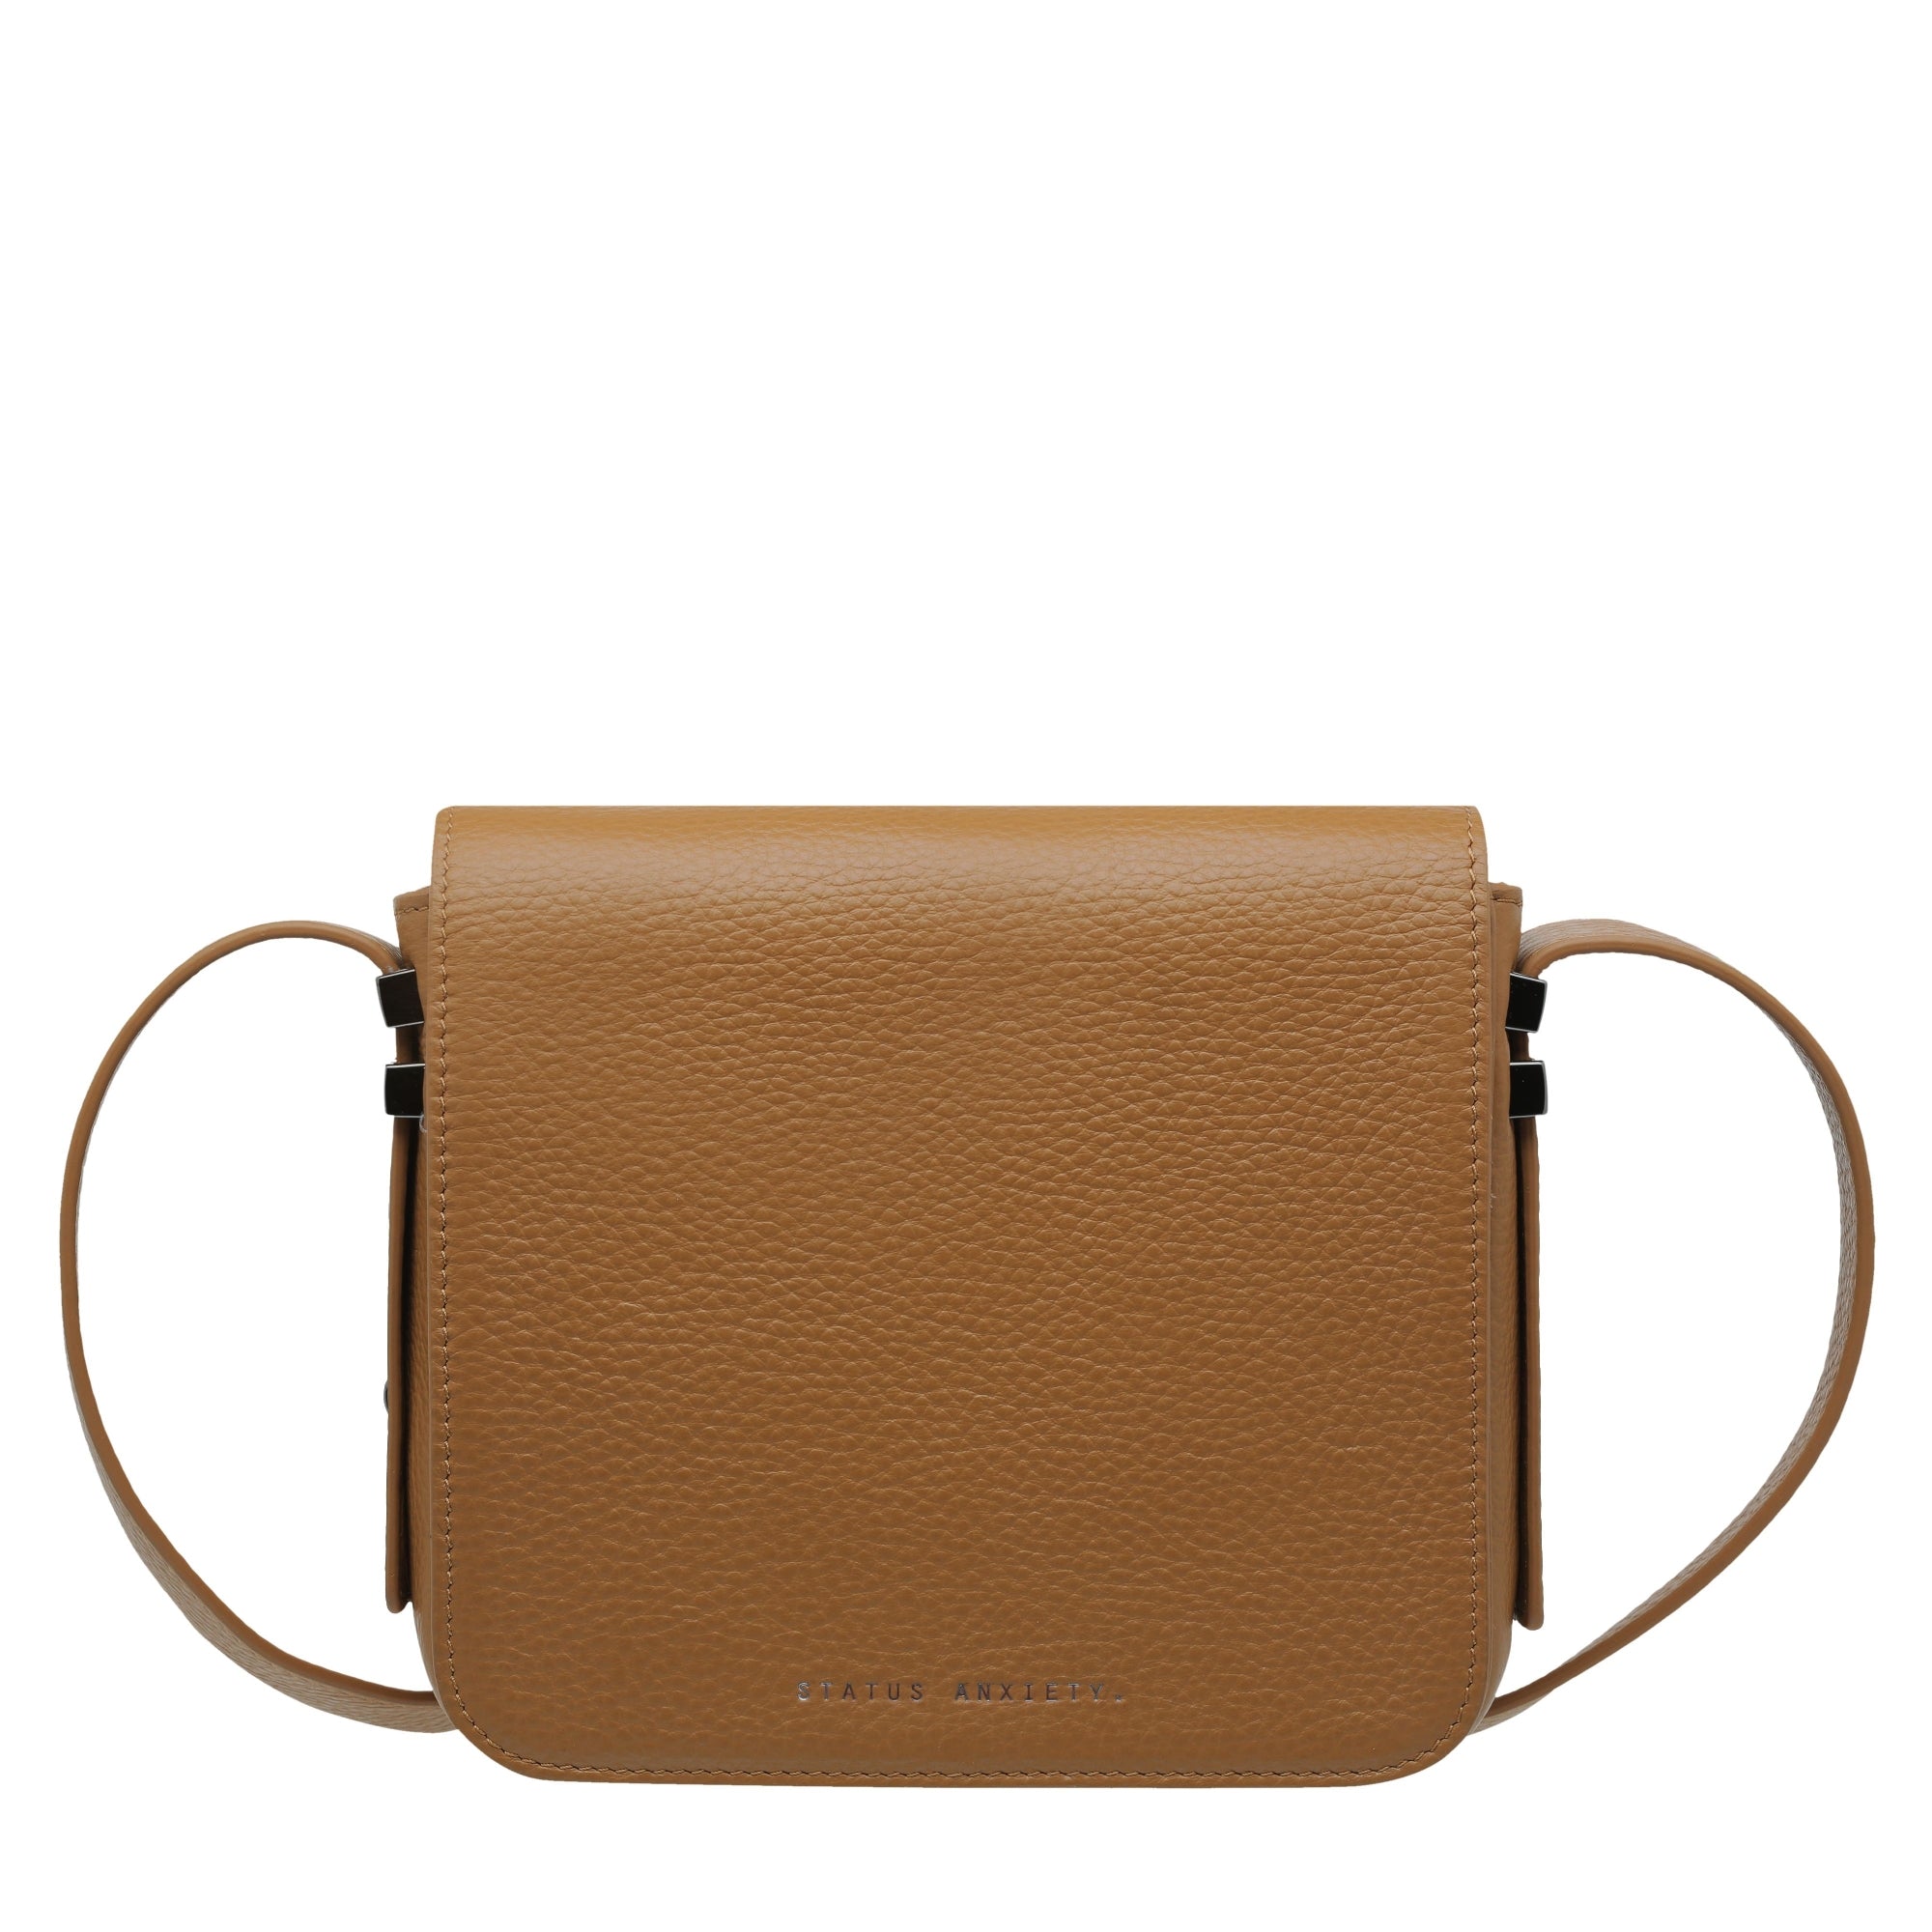 Status Anxiety Want to Believe Bag [COLOUR:Tan]